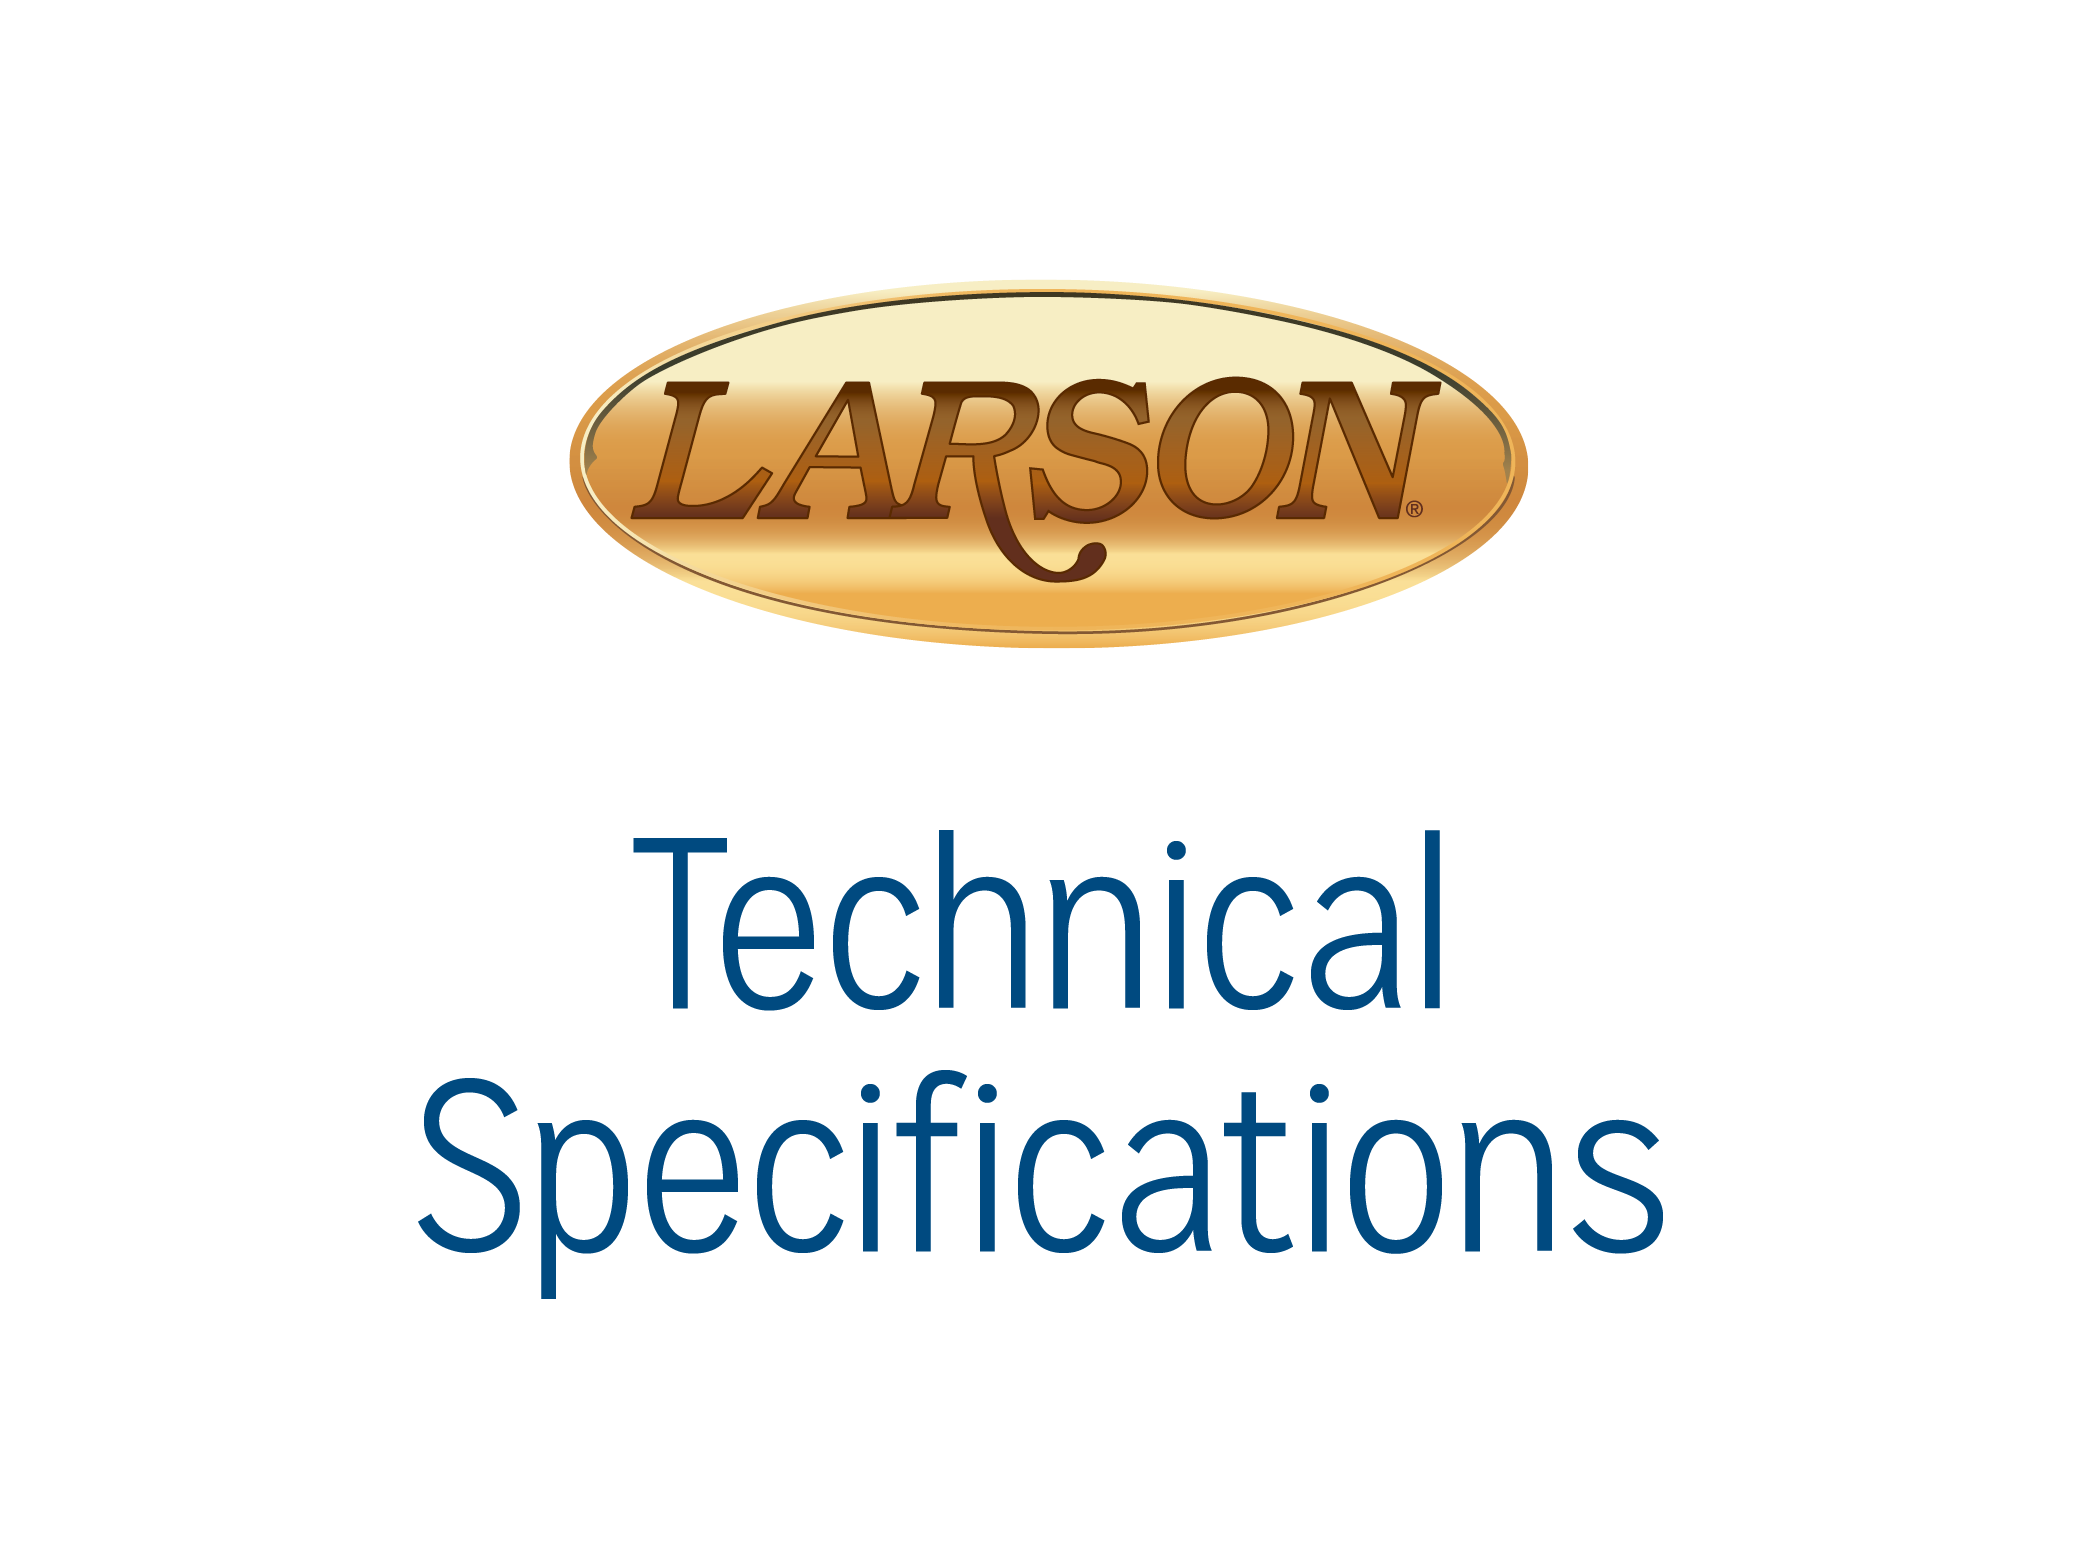 Larson Technical Specifications